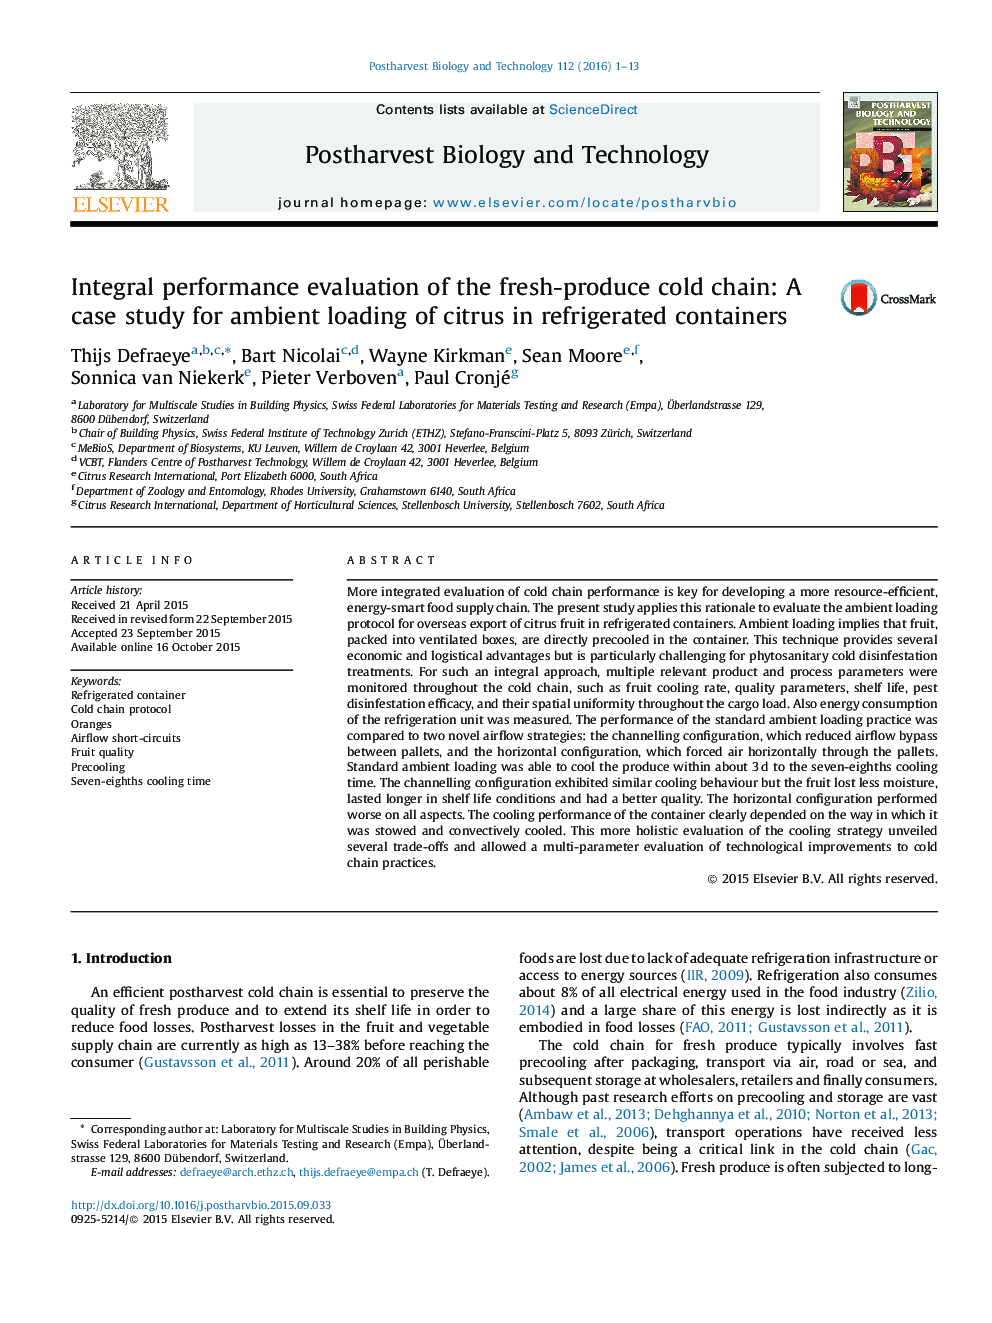 Integral performance evaluation of the fresh-produce cold chain: A case study for ambient loading of citrus in refrigerated containers